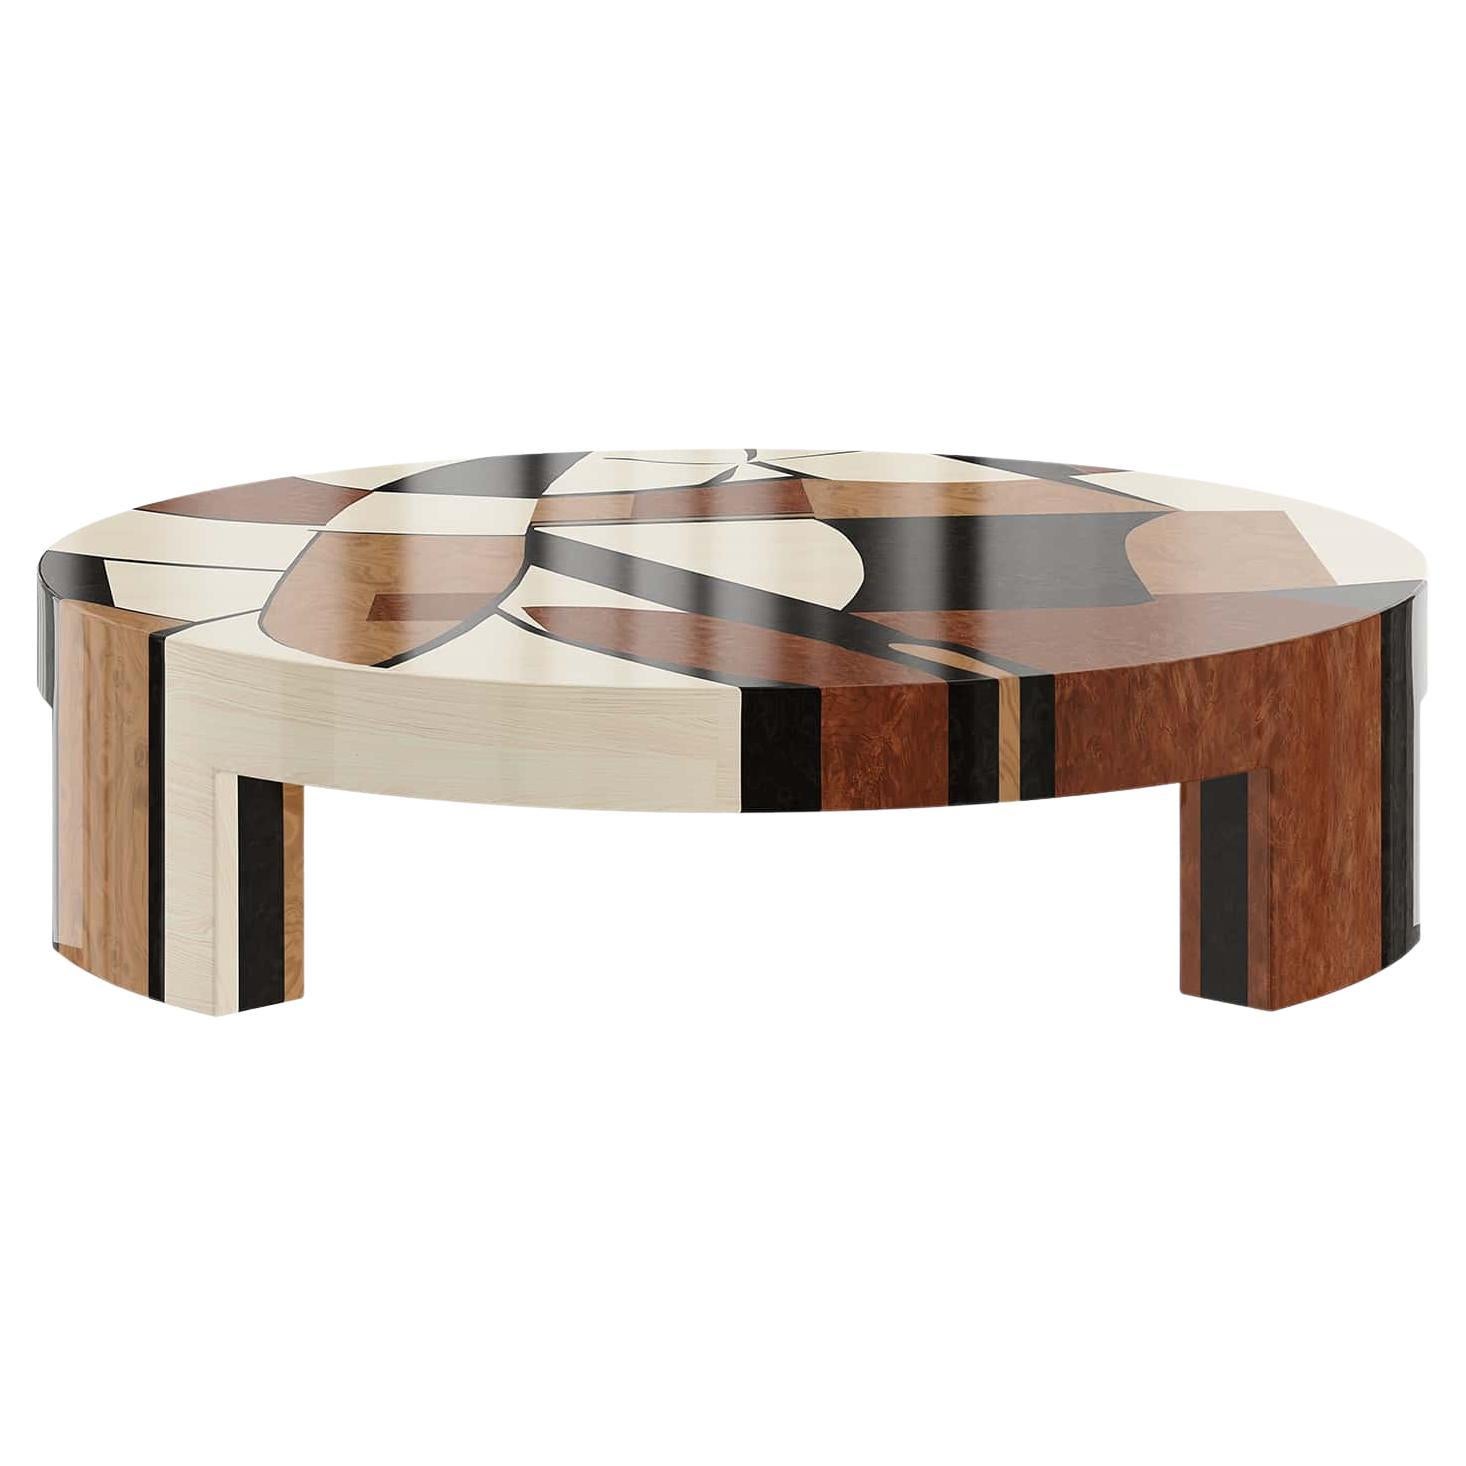 21st Century Contemporary Coffee Center Round Table Abstract Wood Marquetry